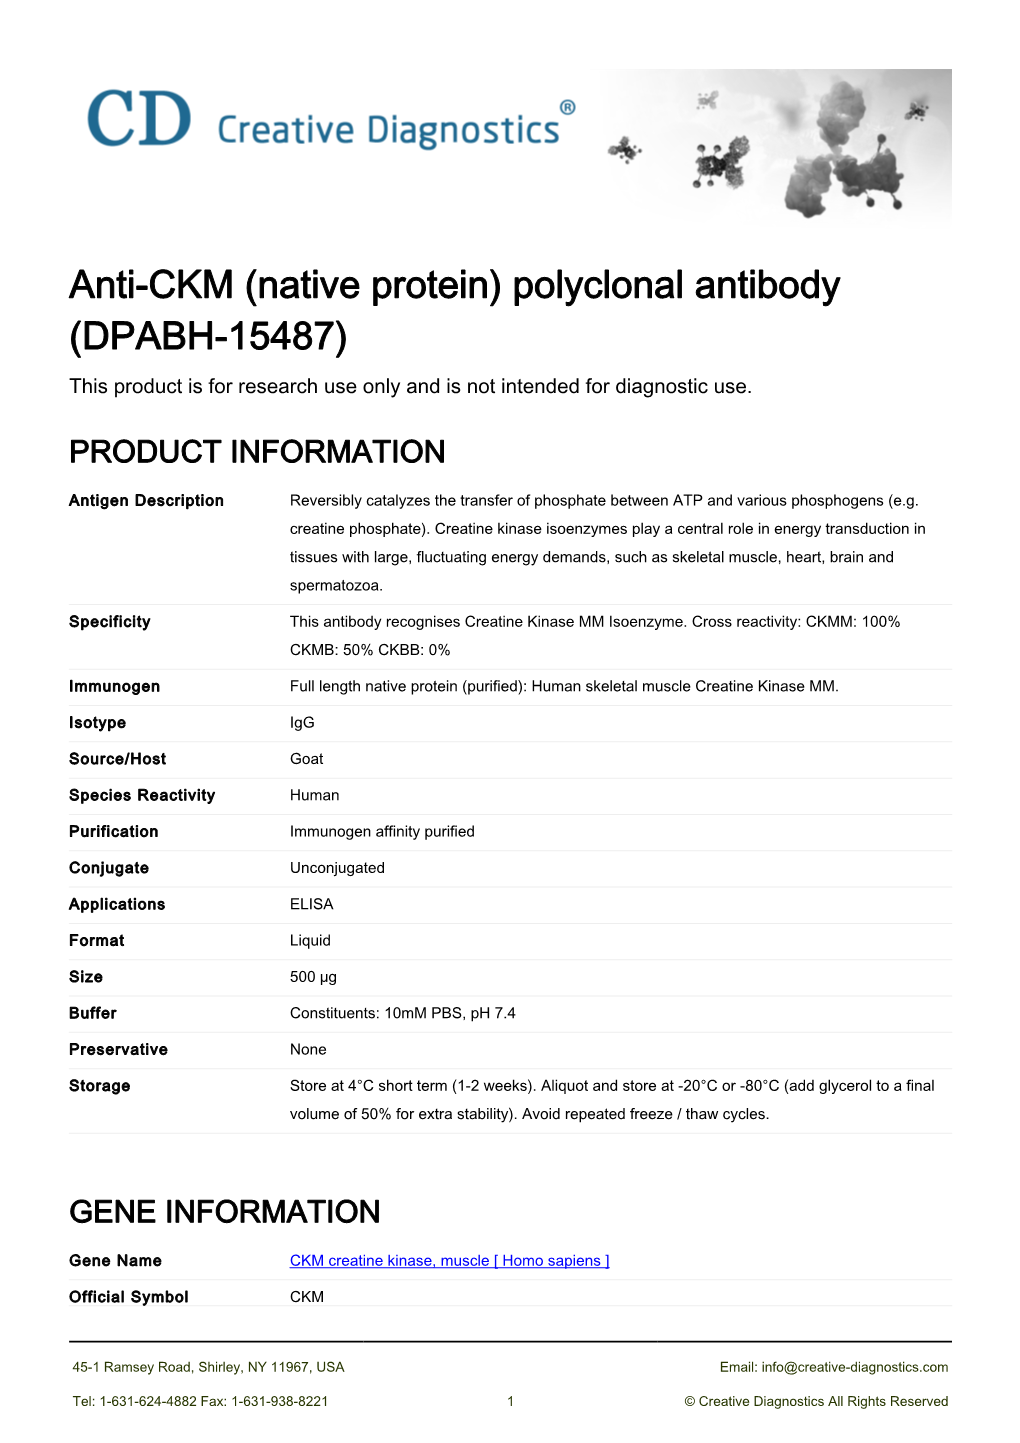 Anti-CKM (Native Protein) Polyclonal Antibody (DPABH-15487) This Product Is for Research Use Only and Is Not Intended for Diagnostic Use